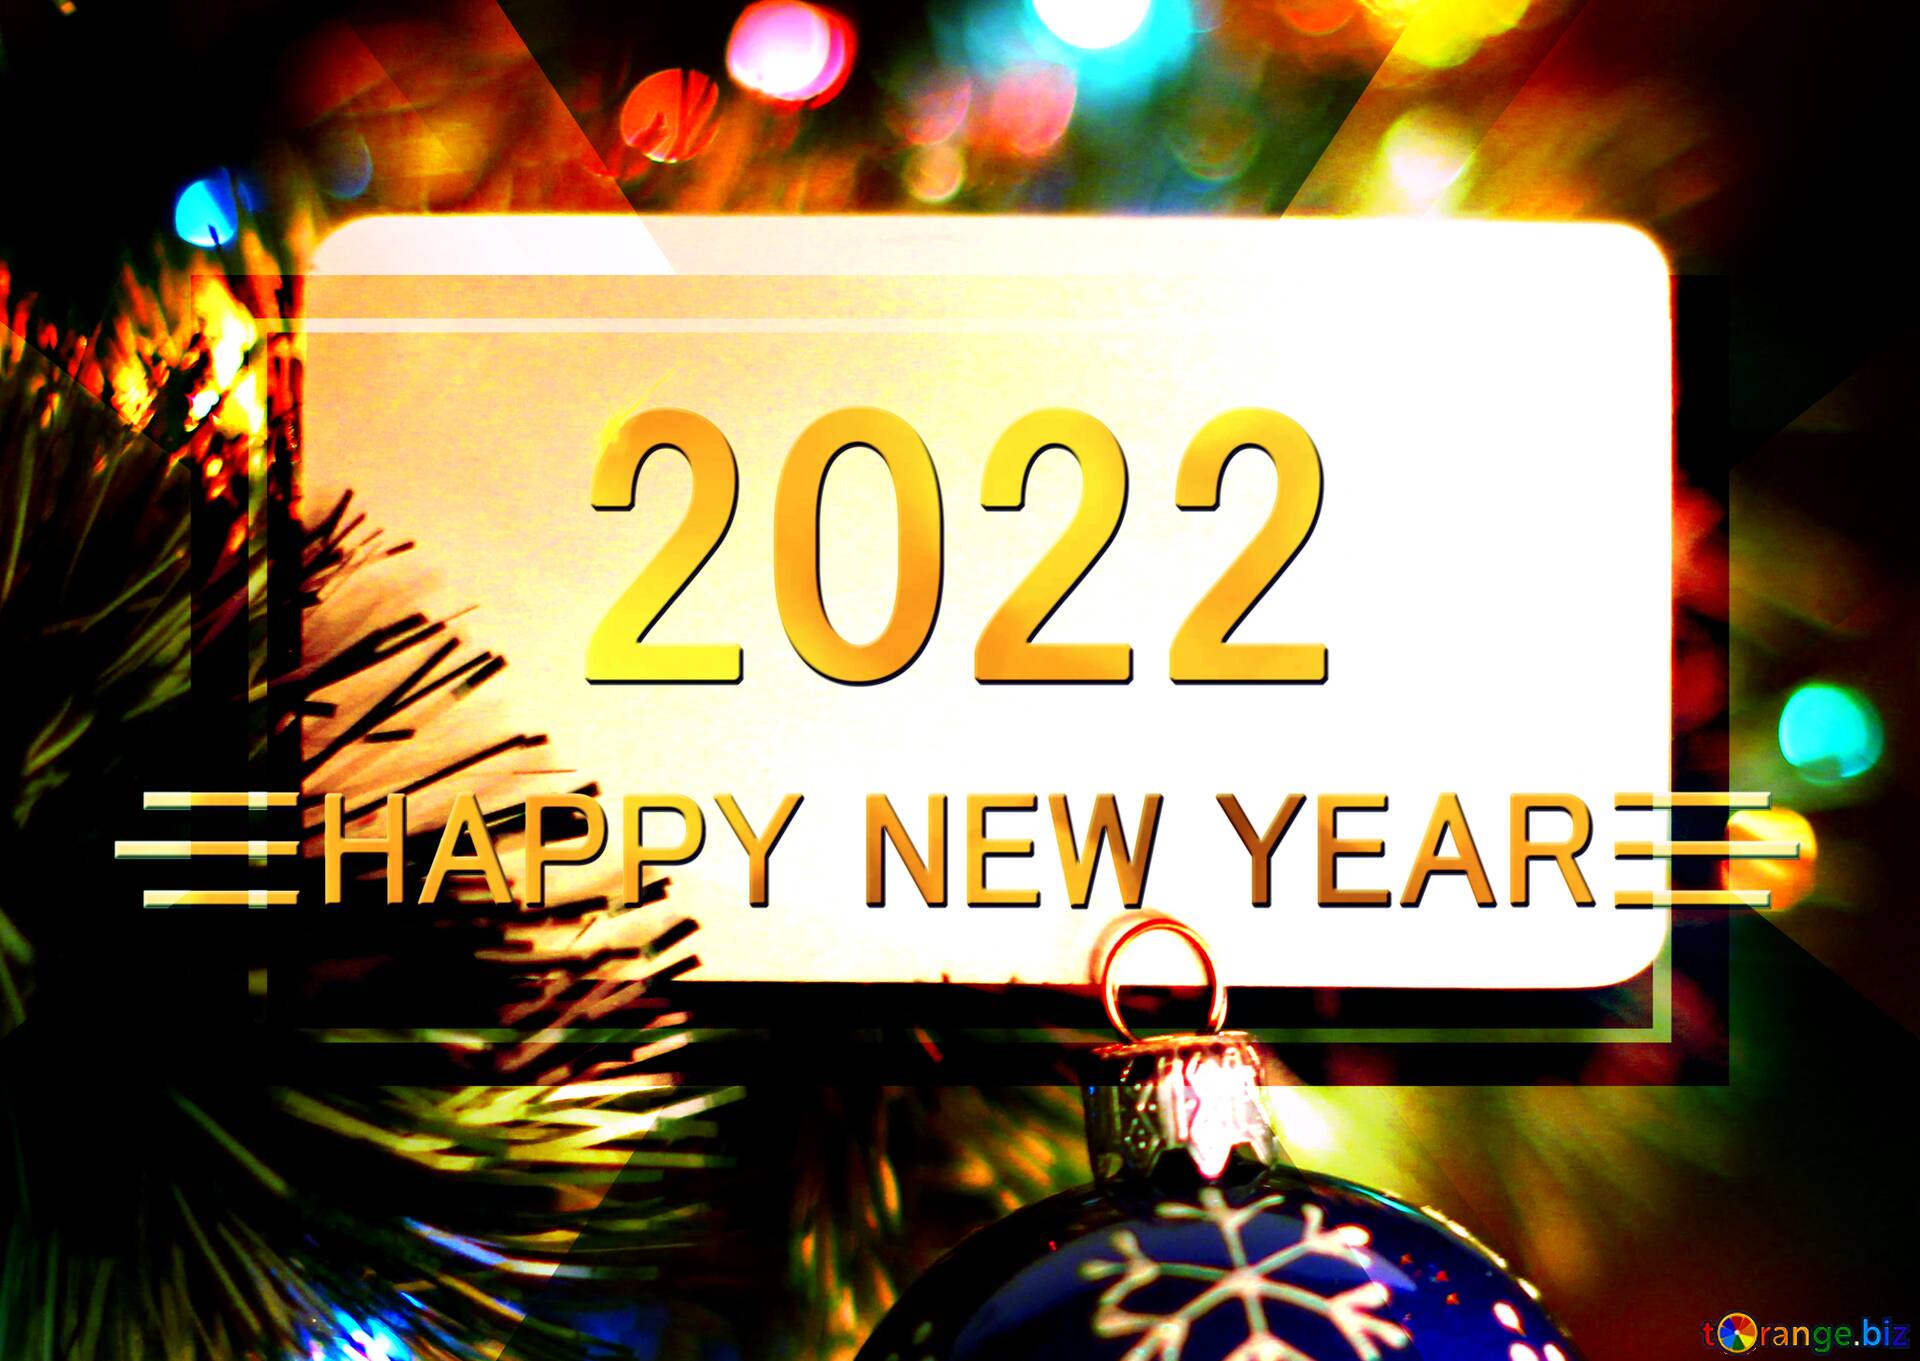 Download Free Picture Invitation Party Happy New Year 2022 Design On CC BY License Free Image Stock TOrange.biz Fx №213227